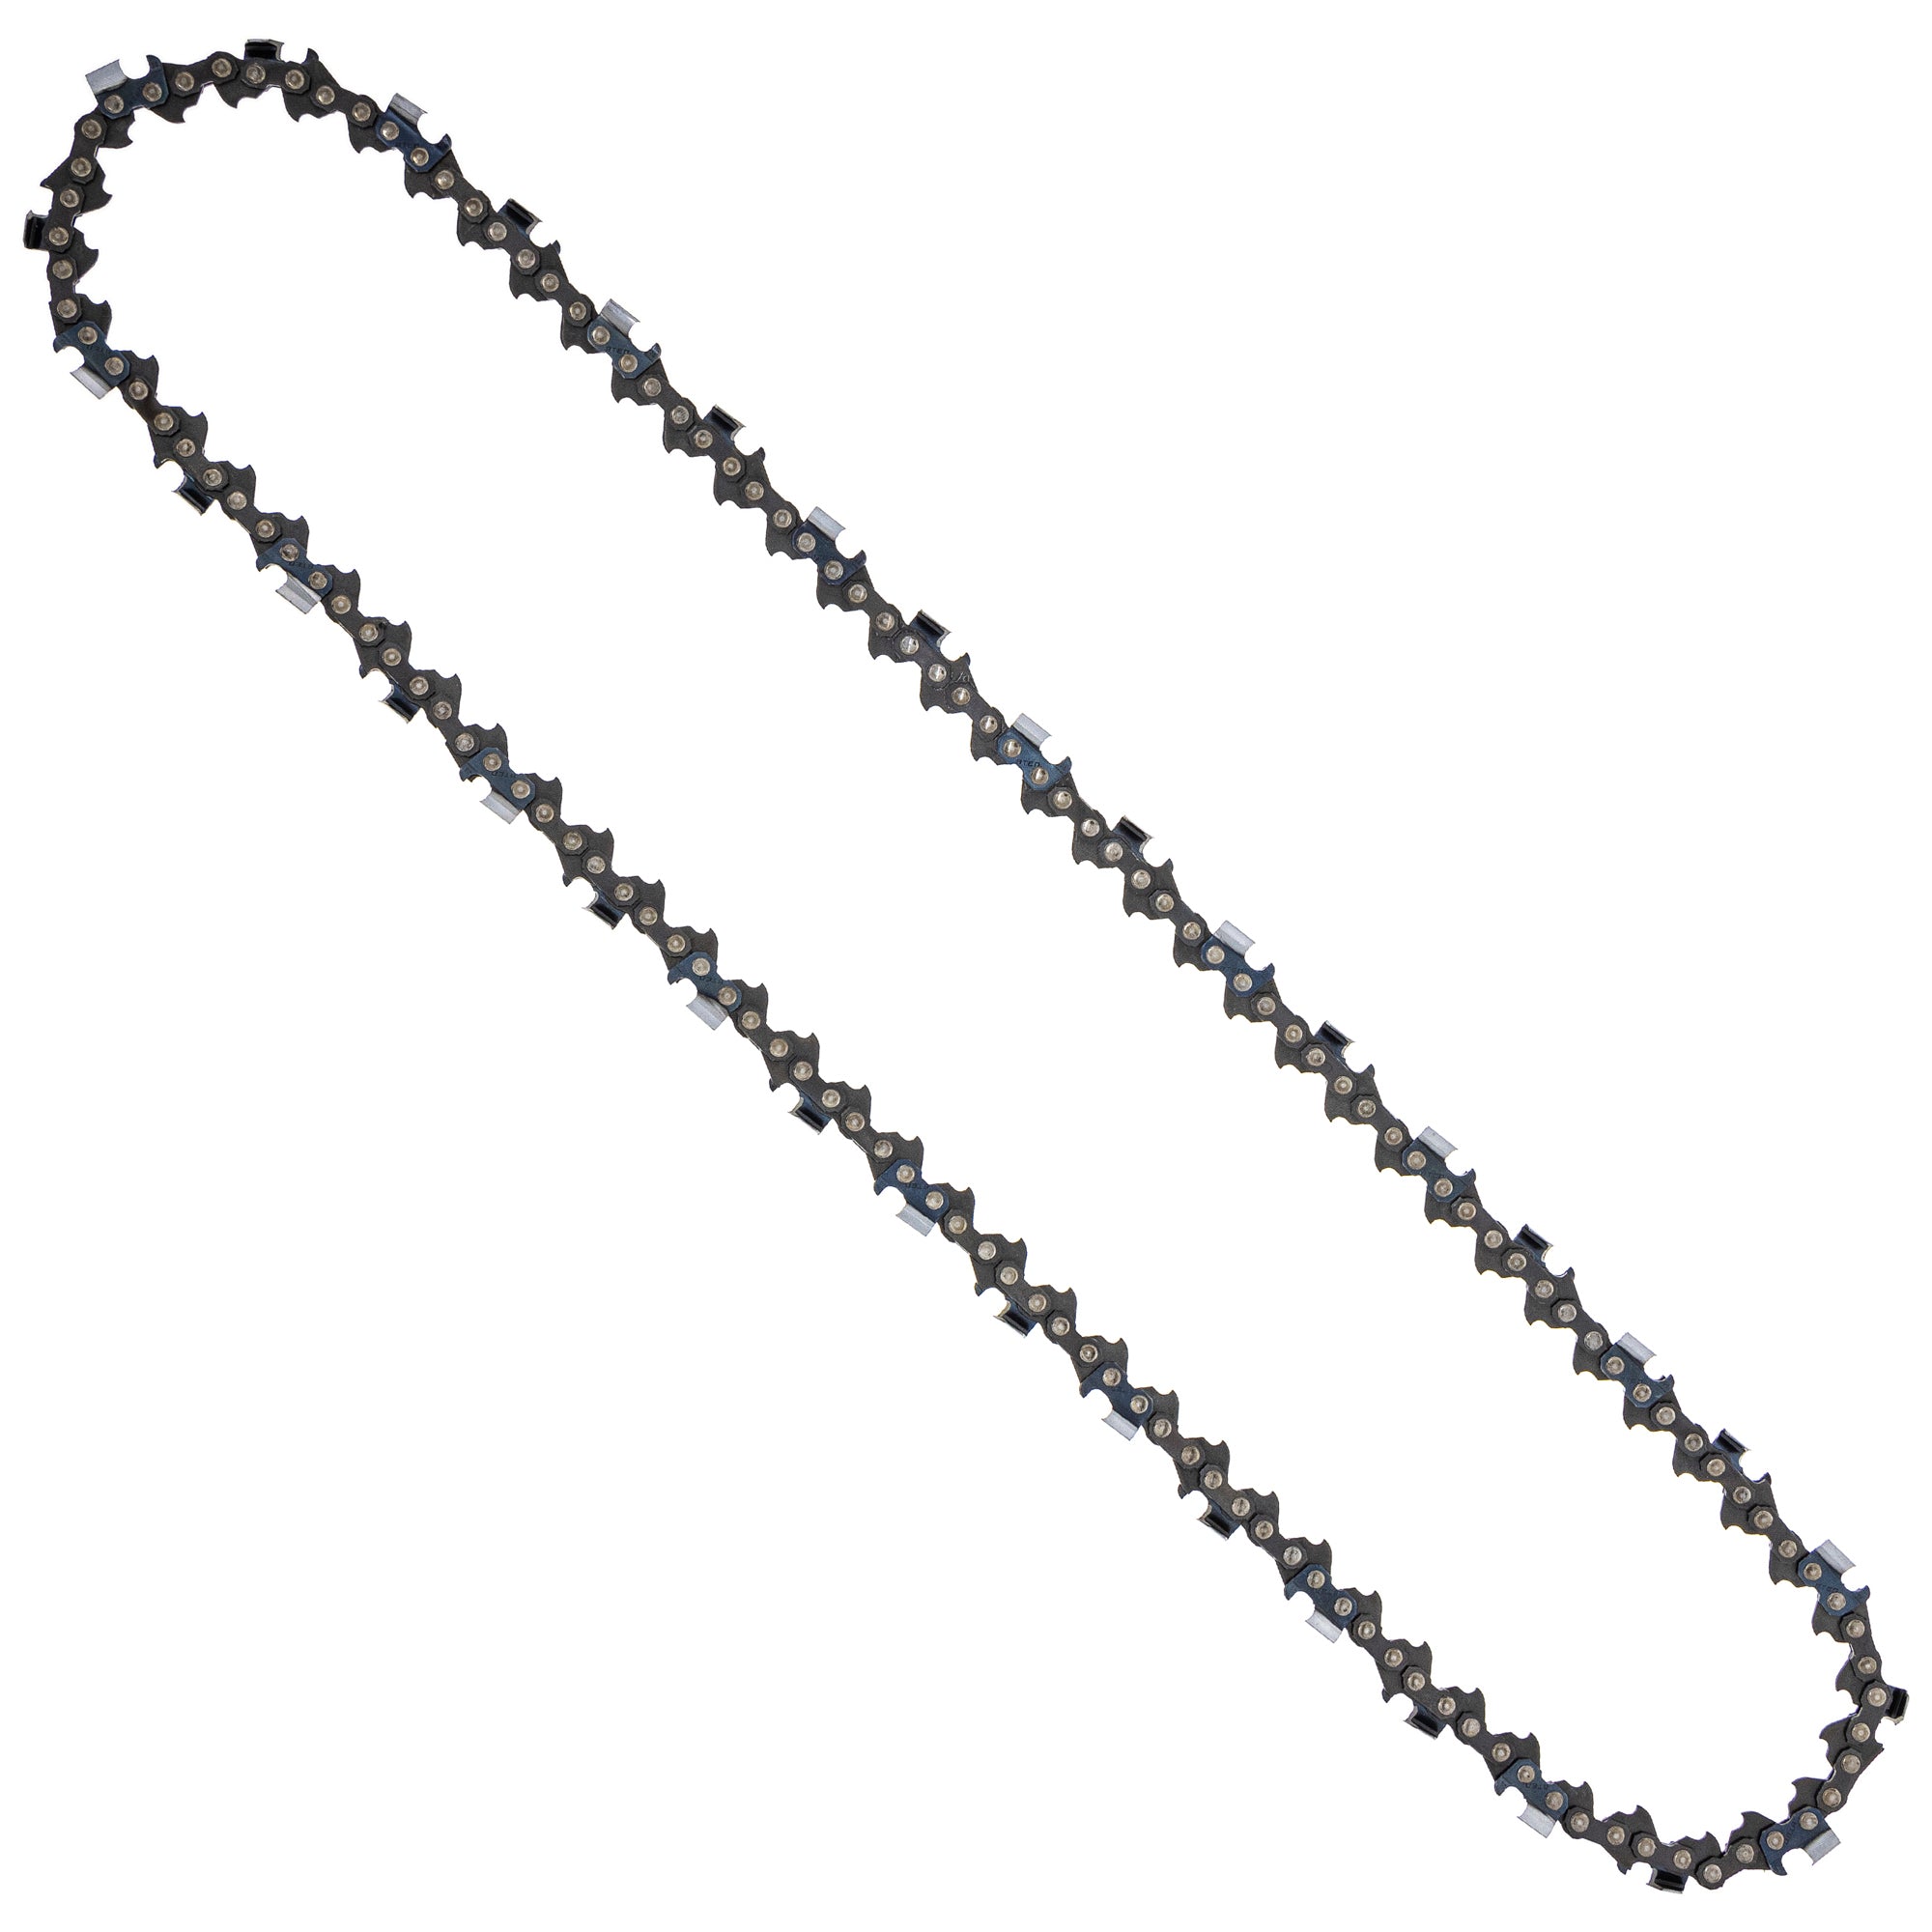 8TEN 810-CCC2263H Chain 3-Pack for zOTHER Oregon Husqvarna Poulan